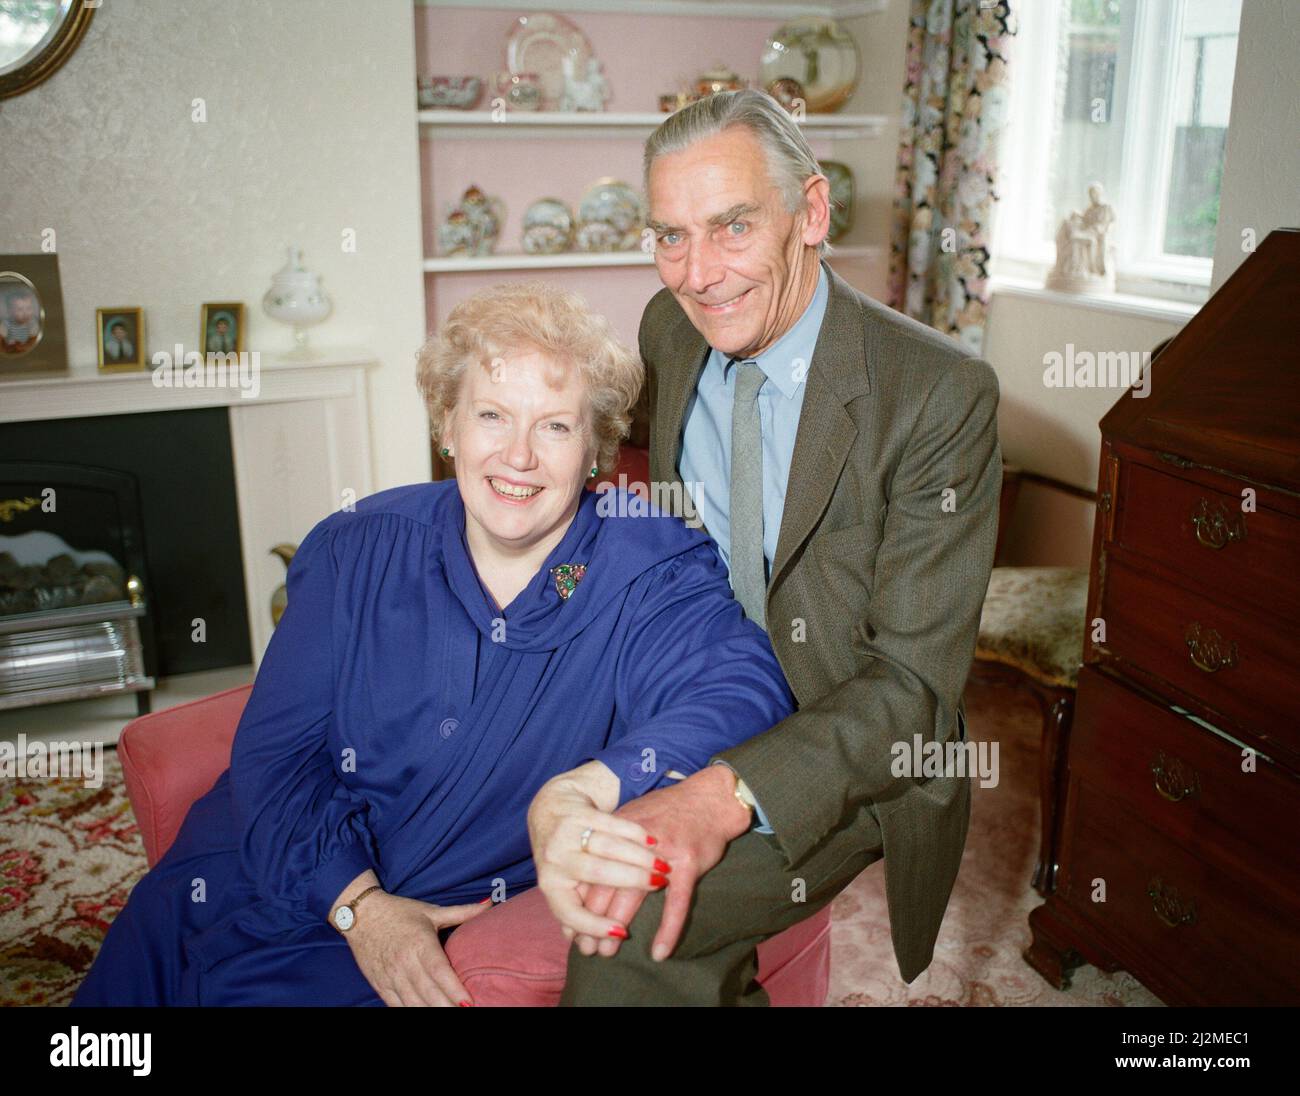 Denise Robertson feature. 27th October 1989. Stock Photo